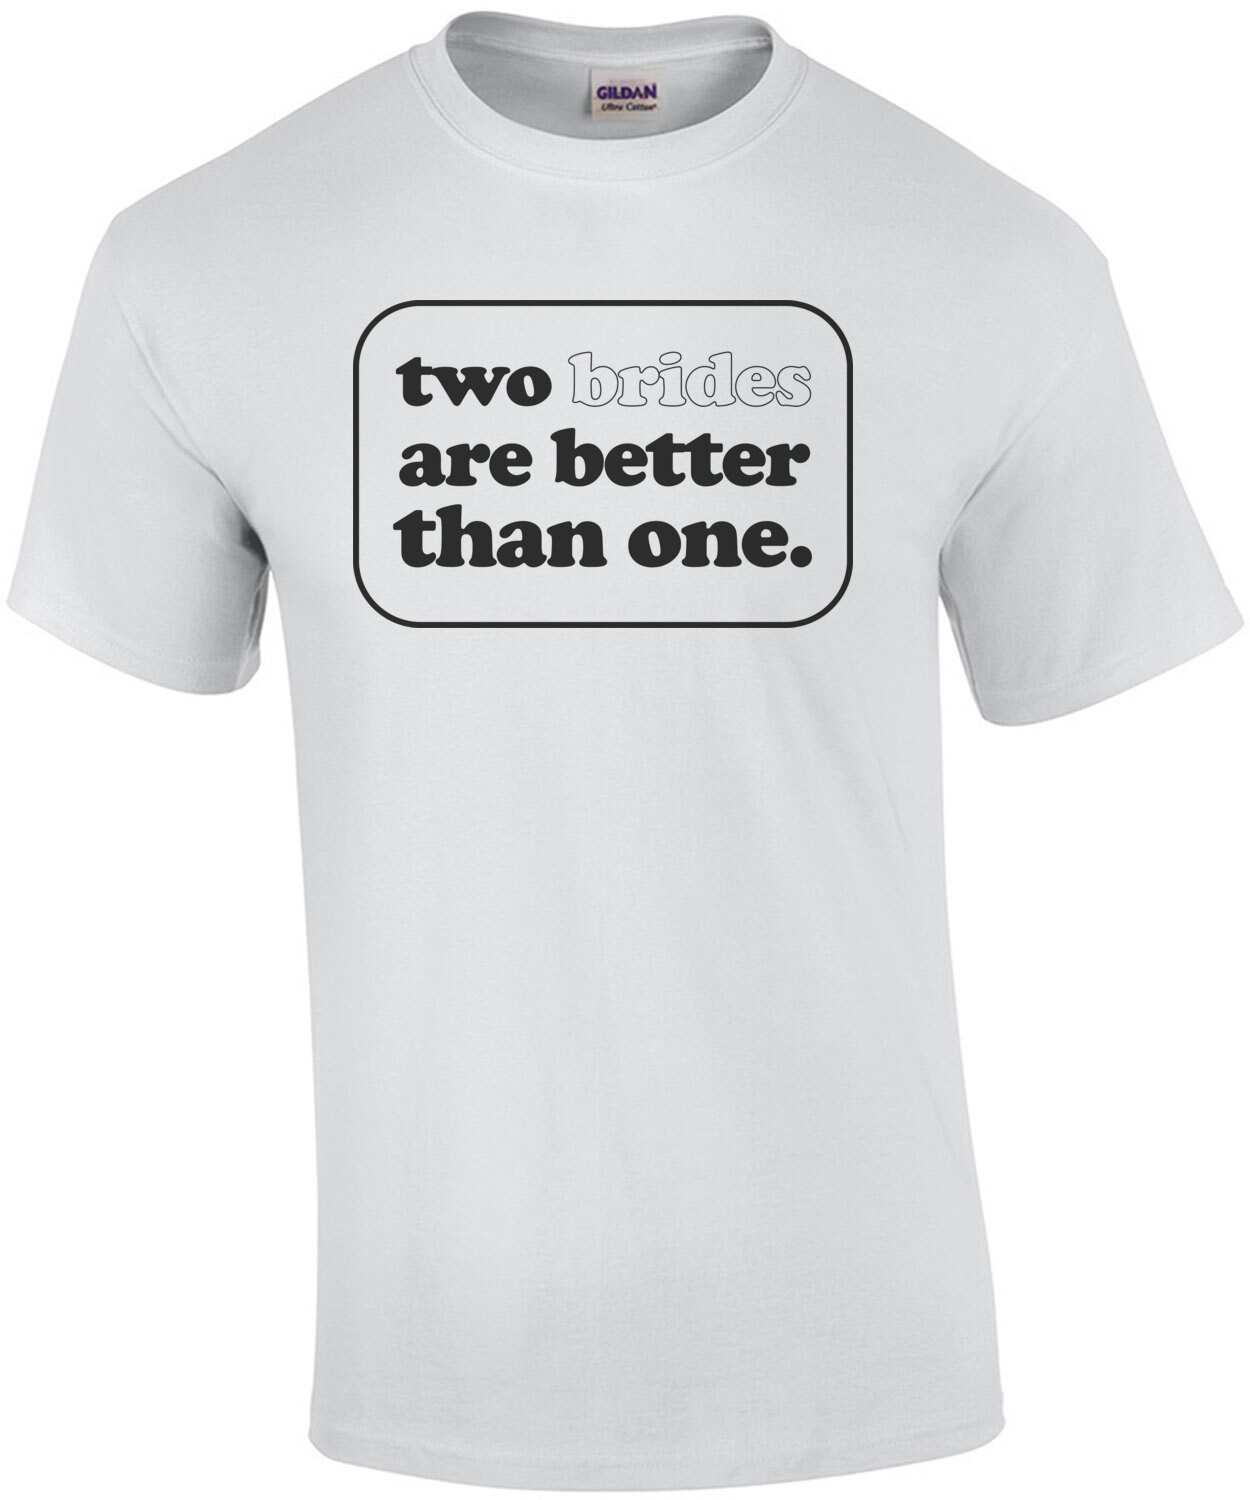 two brides are better than one. lgbtq+ T-Shirt